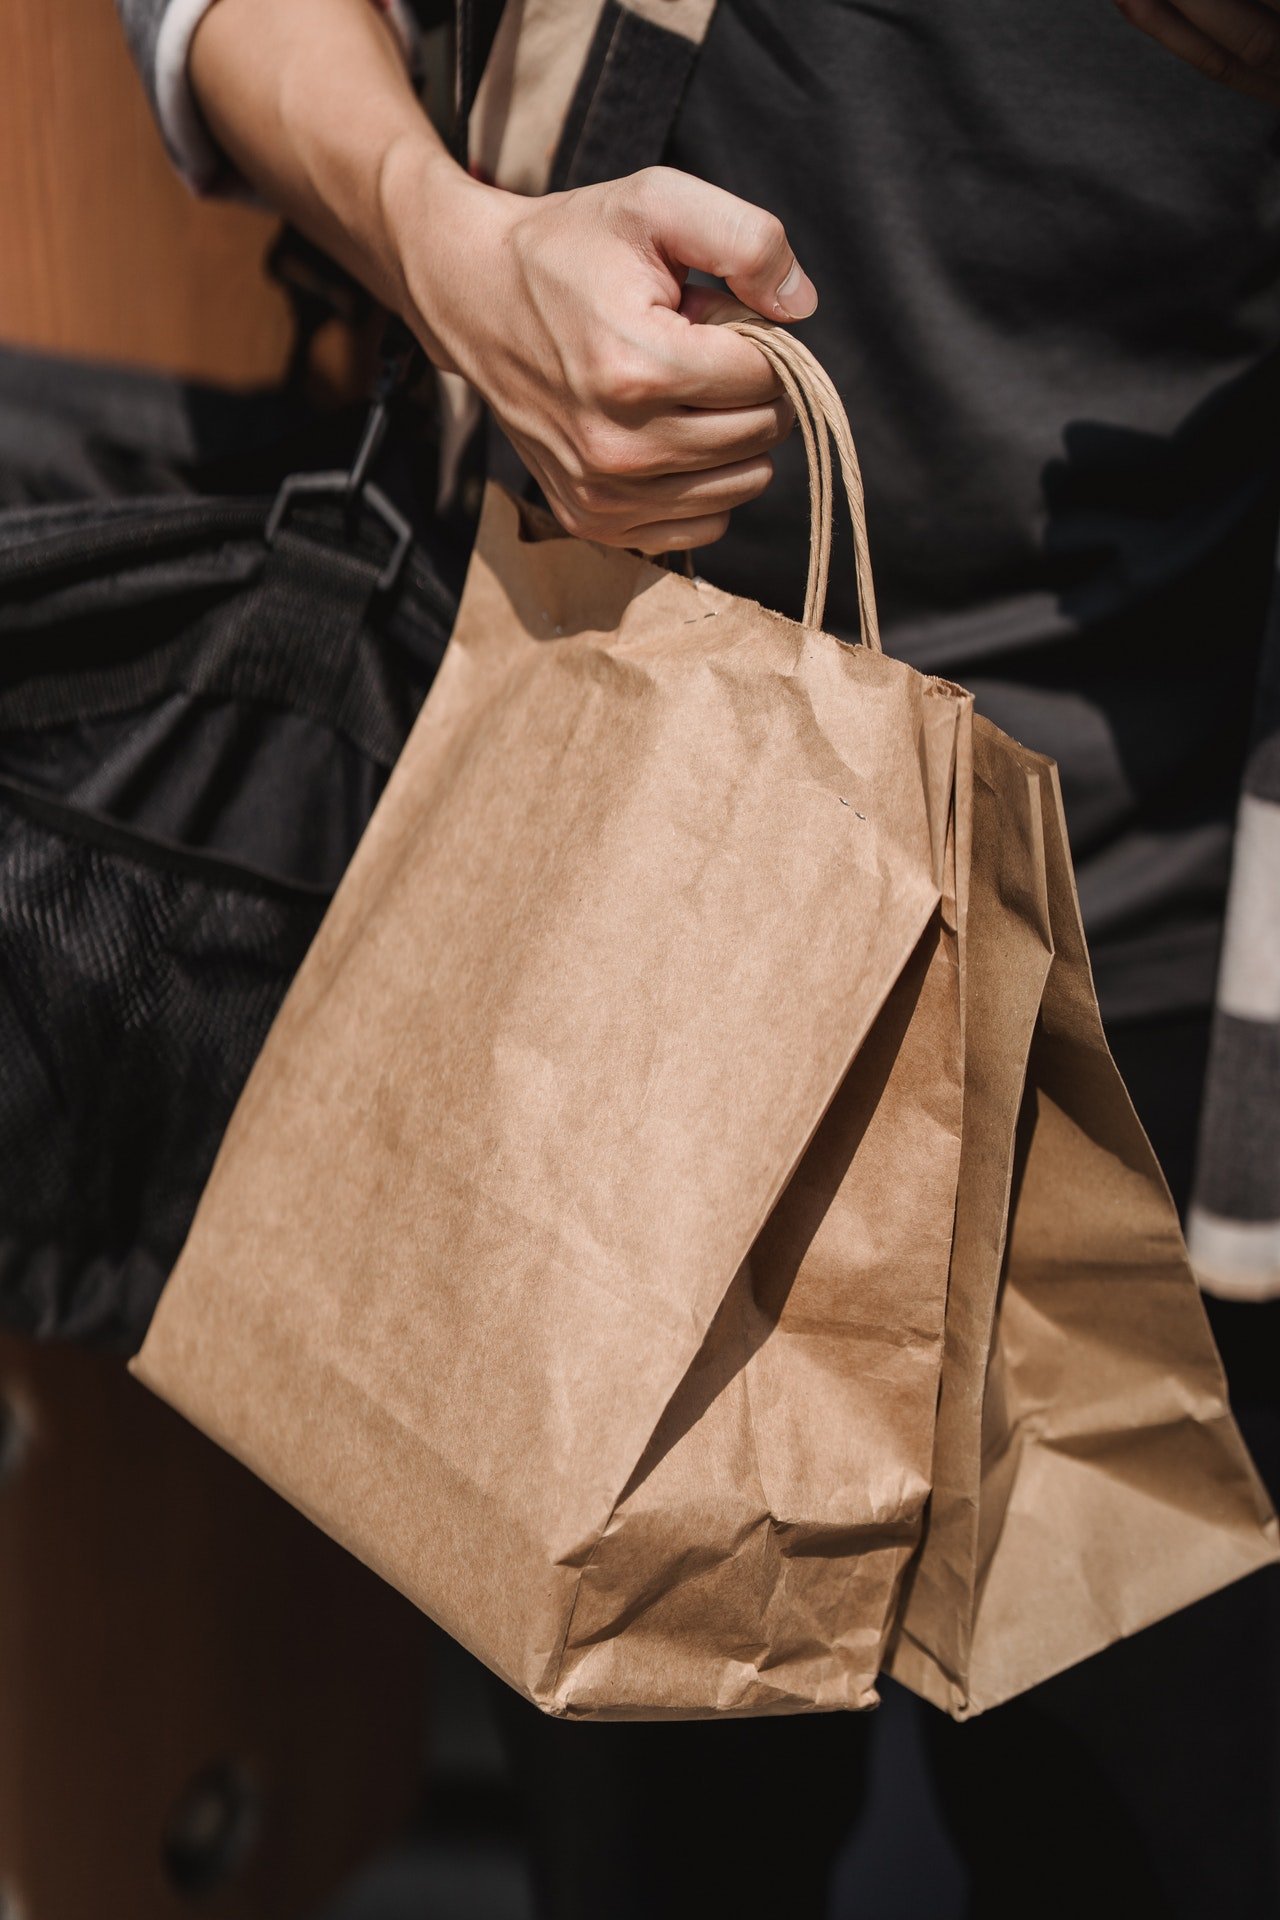 Kyle watched as the old man and his assistant finished shopping and came towards the till | Source: Pexels